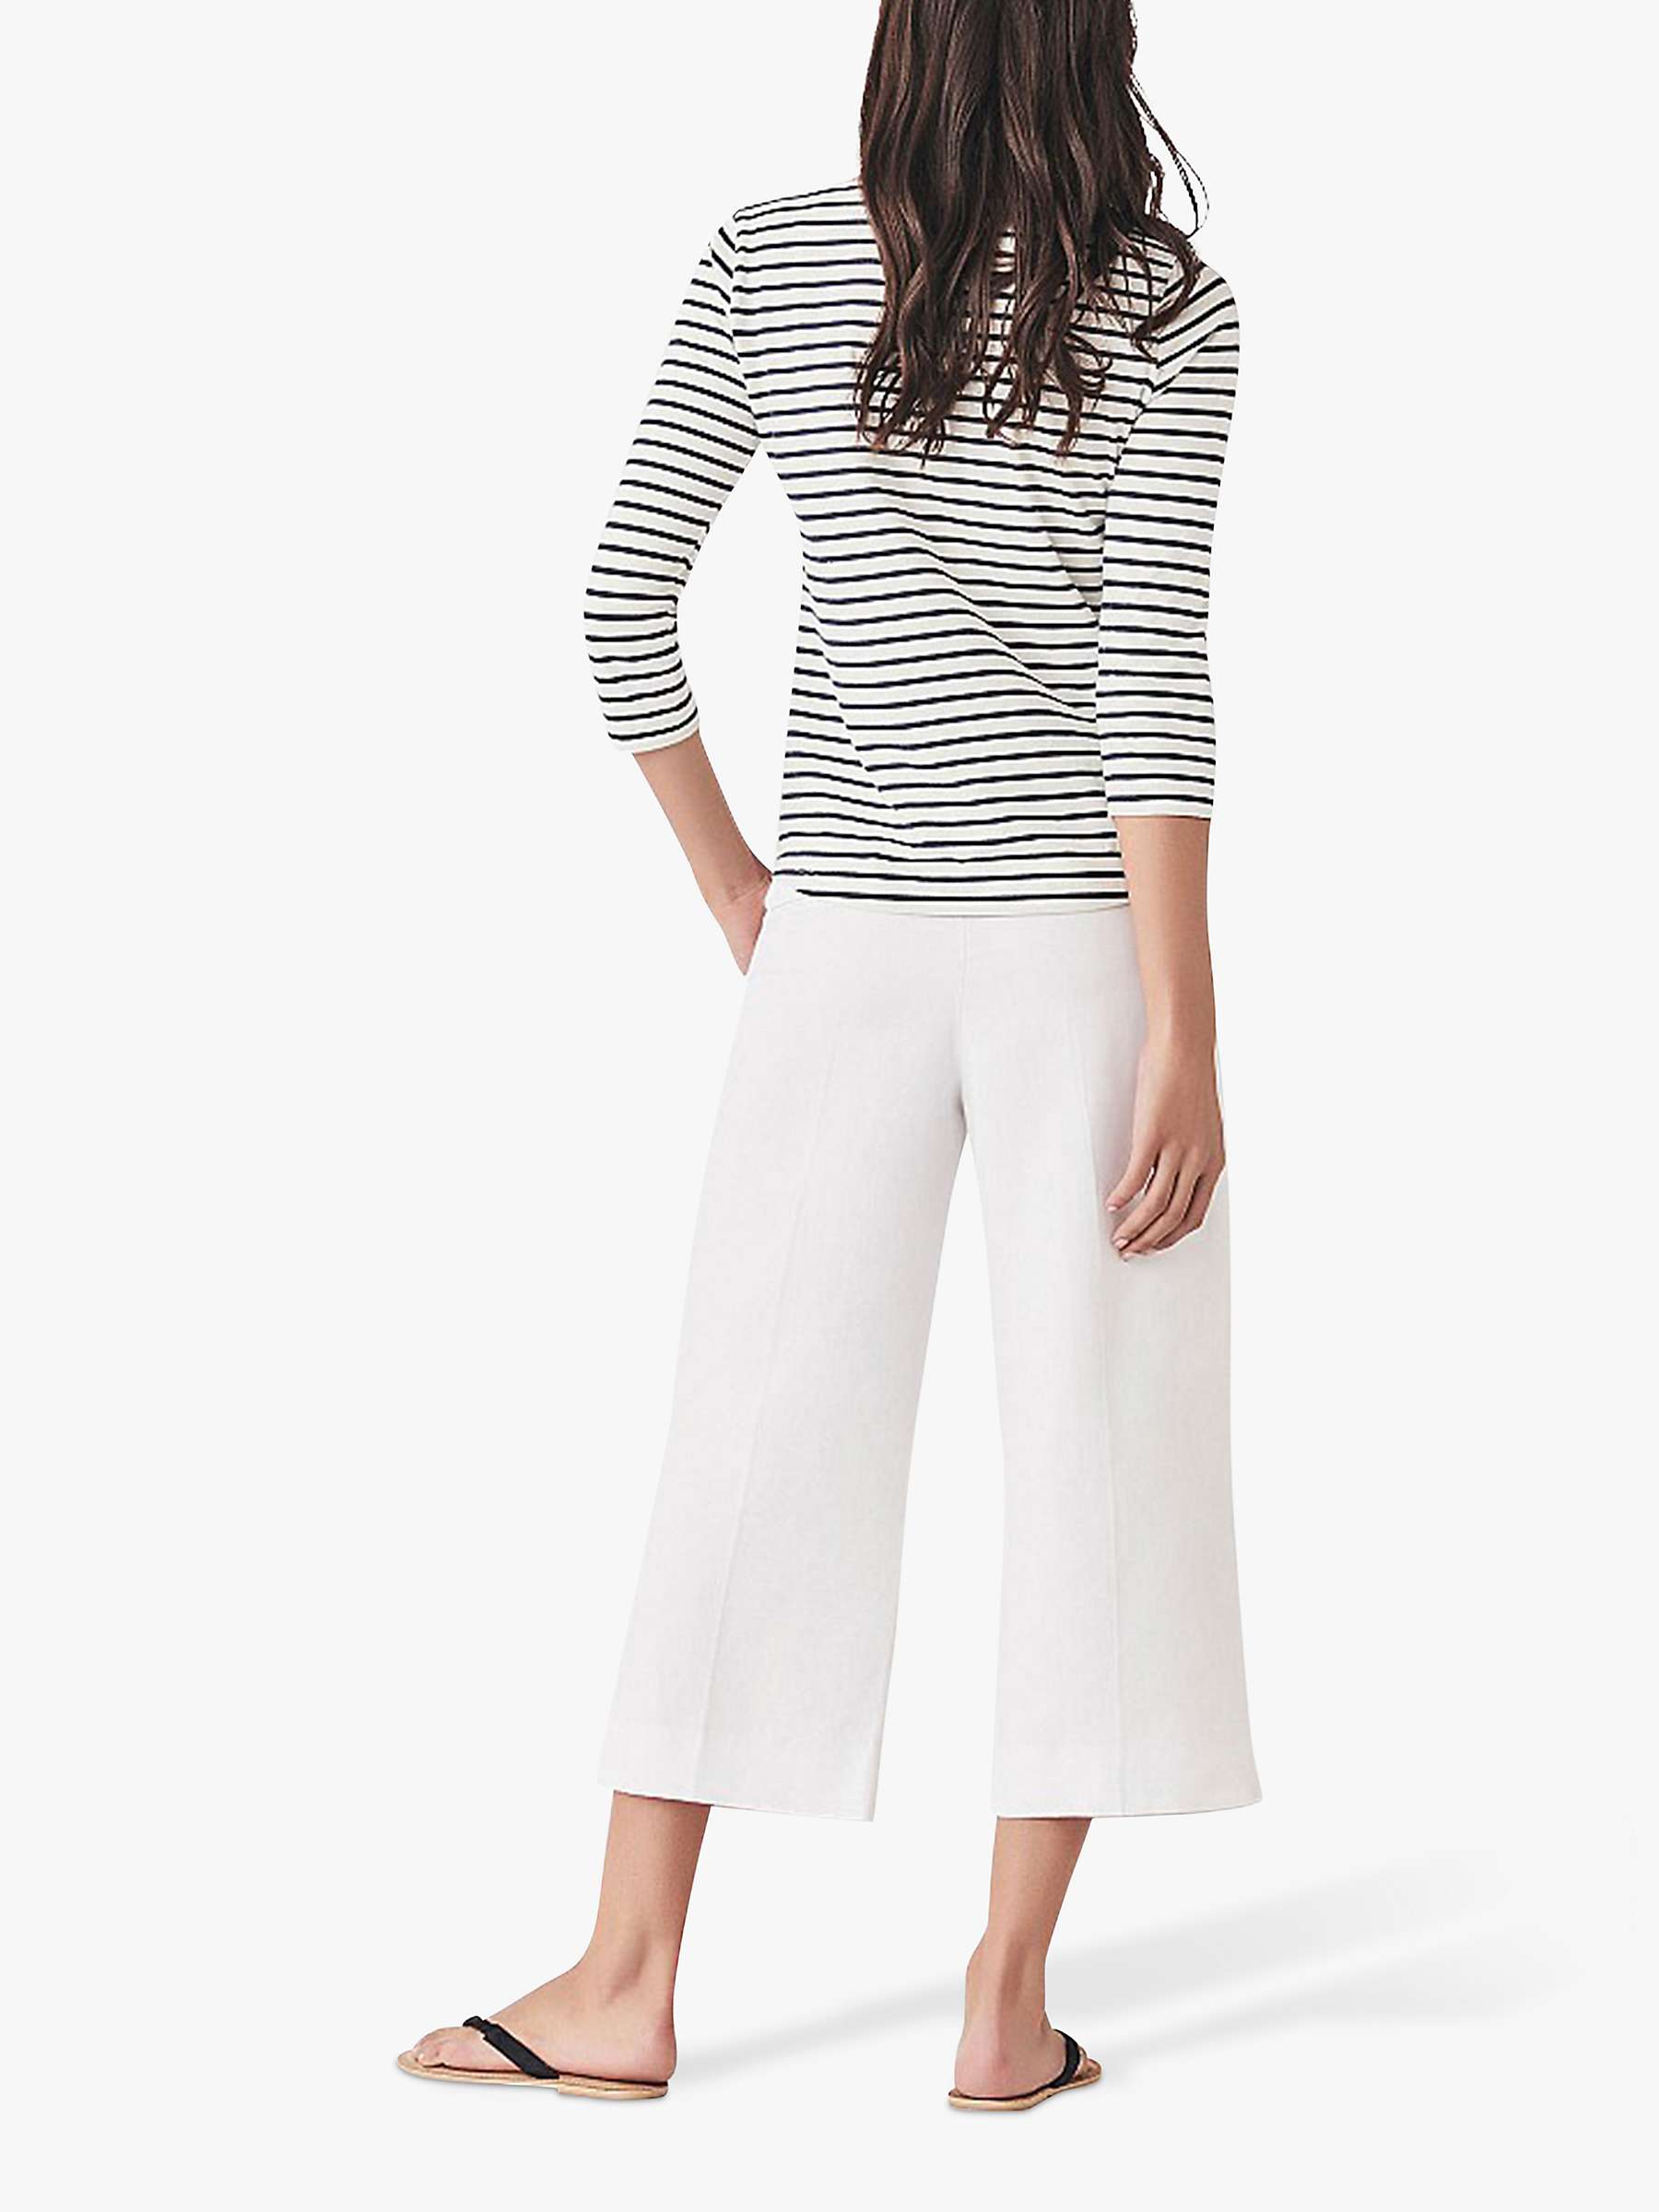 Buy Crew Clothing Wide Leg Cropped Trousers, White Online at johnlewis.com